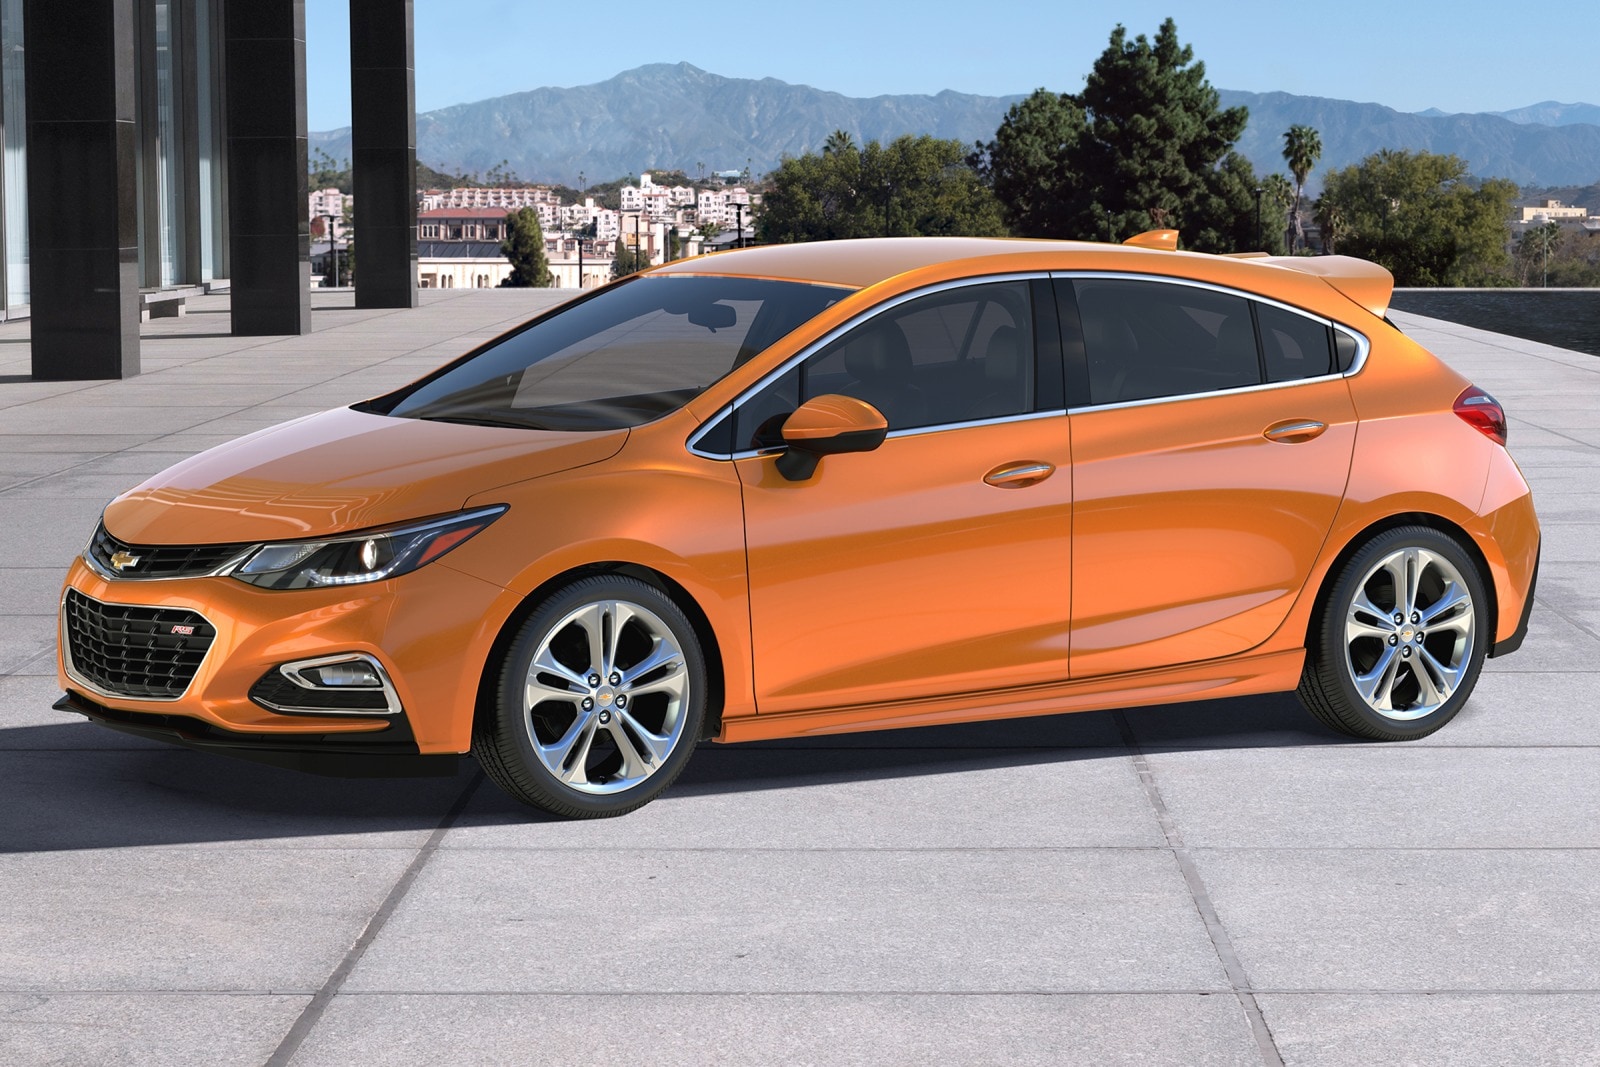 2018 Chevy Cruze Review & Ratings | Edmunds